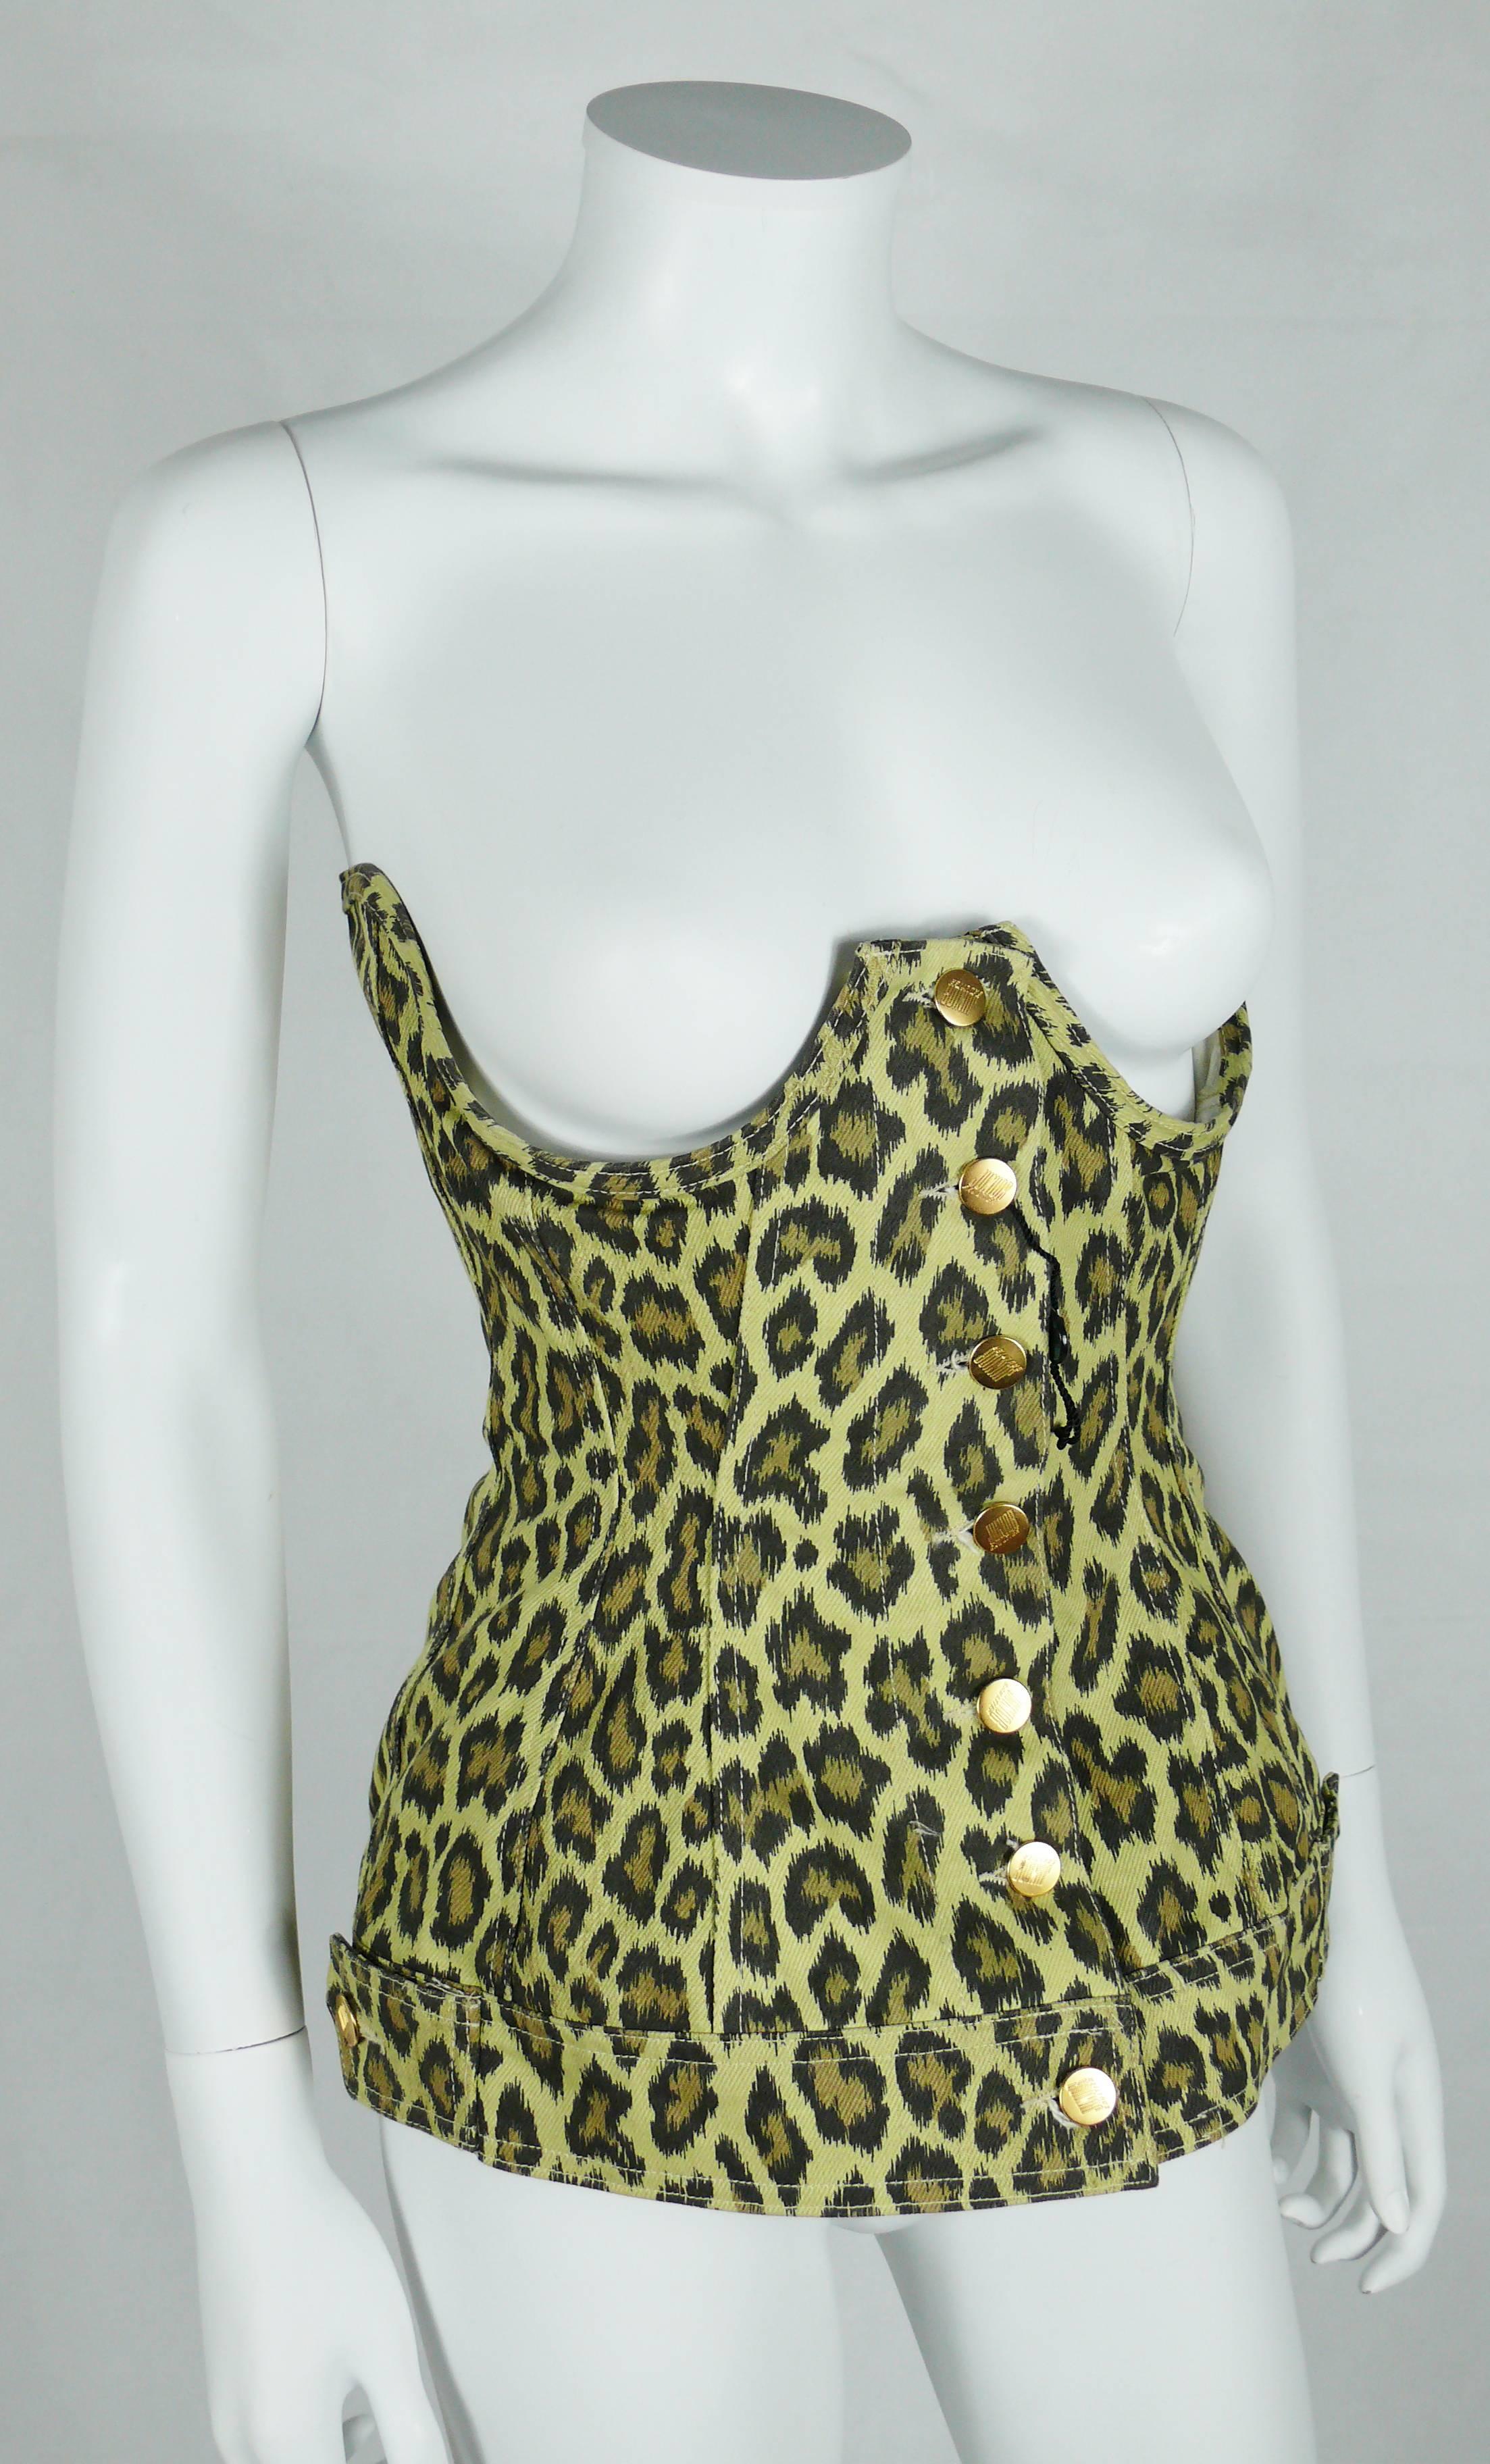 JEAN PAUL GAULTIER vintage cheetah print boned underbust corset.

Front buttoning.
Corset lace-up back fastening.
Boned underbust.

Unworn condition - Still with original tag.

Label reads JUNIOR GAULTIER Made in Italy.

Composition label reads :